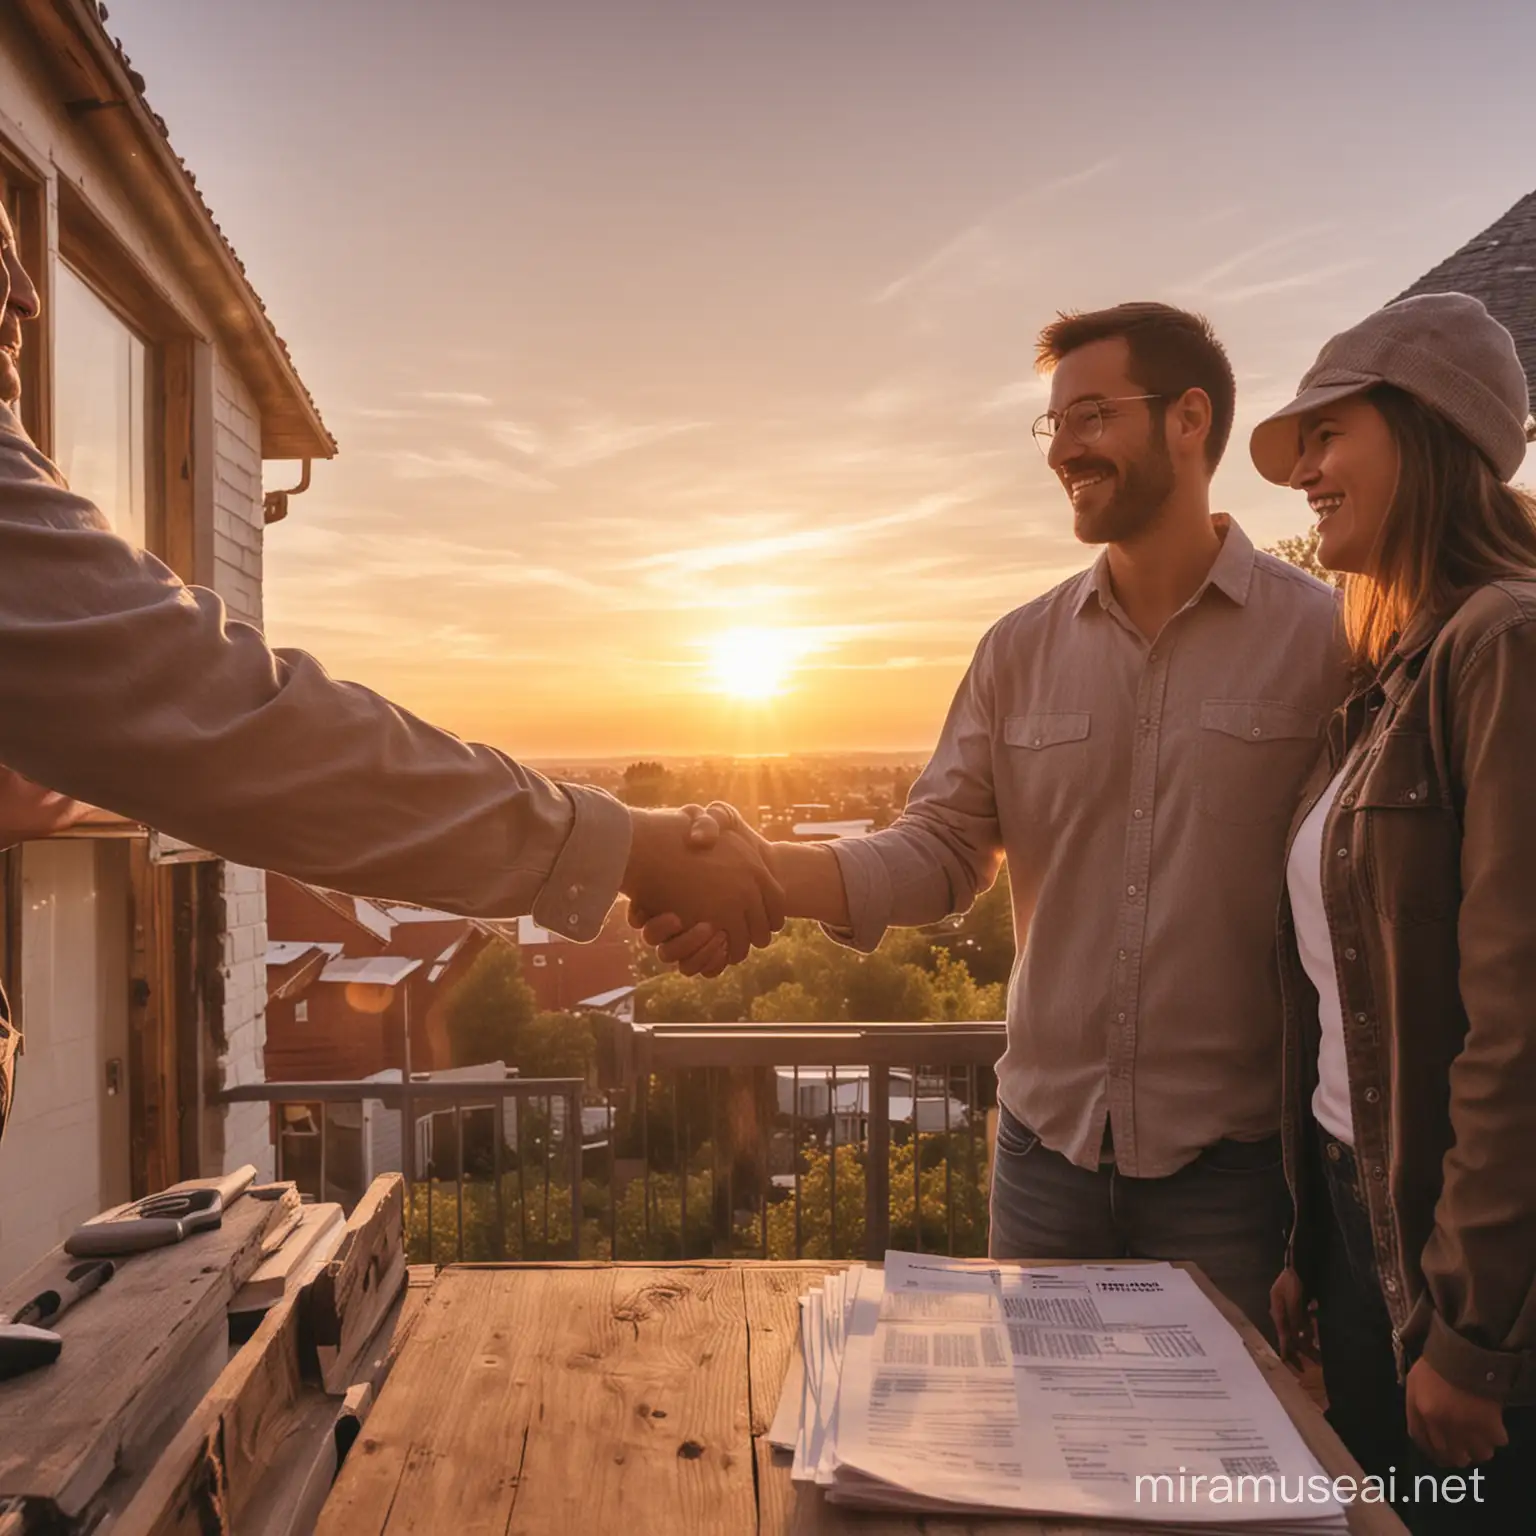 Home Renovation Agreement Contractor and Homeowner Handshake at Sunset